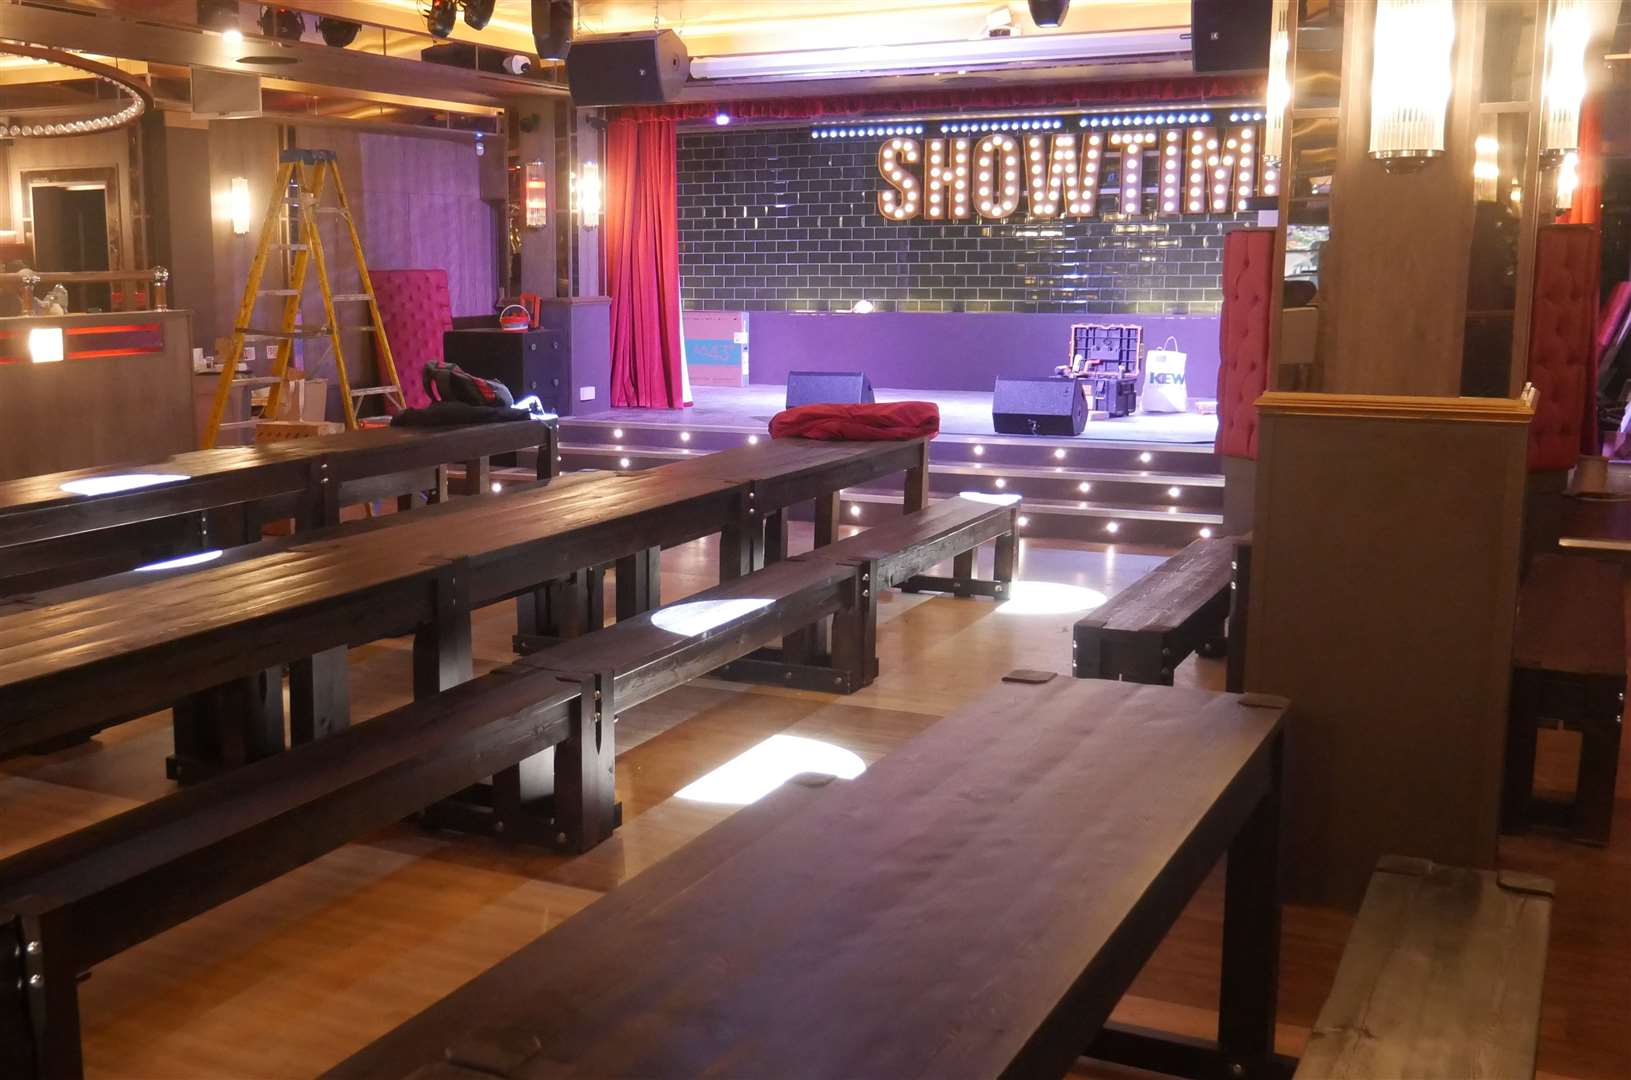 The main seating and stage area in the show bar in Ovation